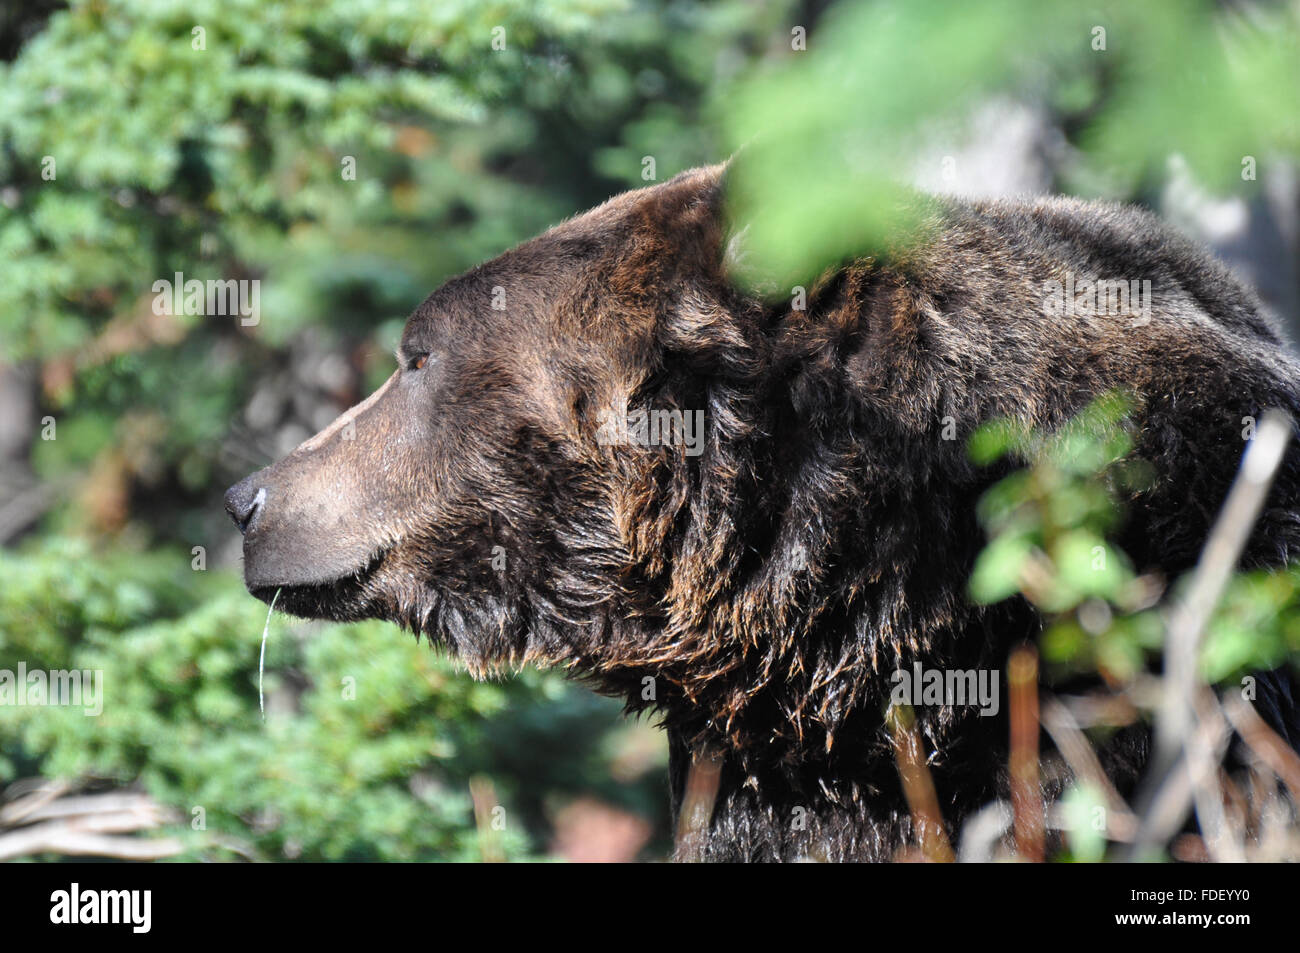 Ursus arctos: Side shot of face of a Grizzly Bear. Stock Photo